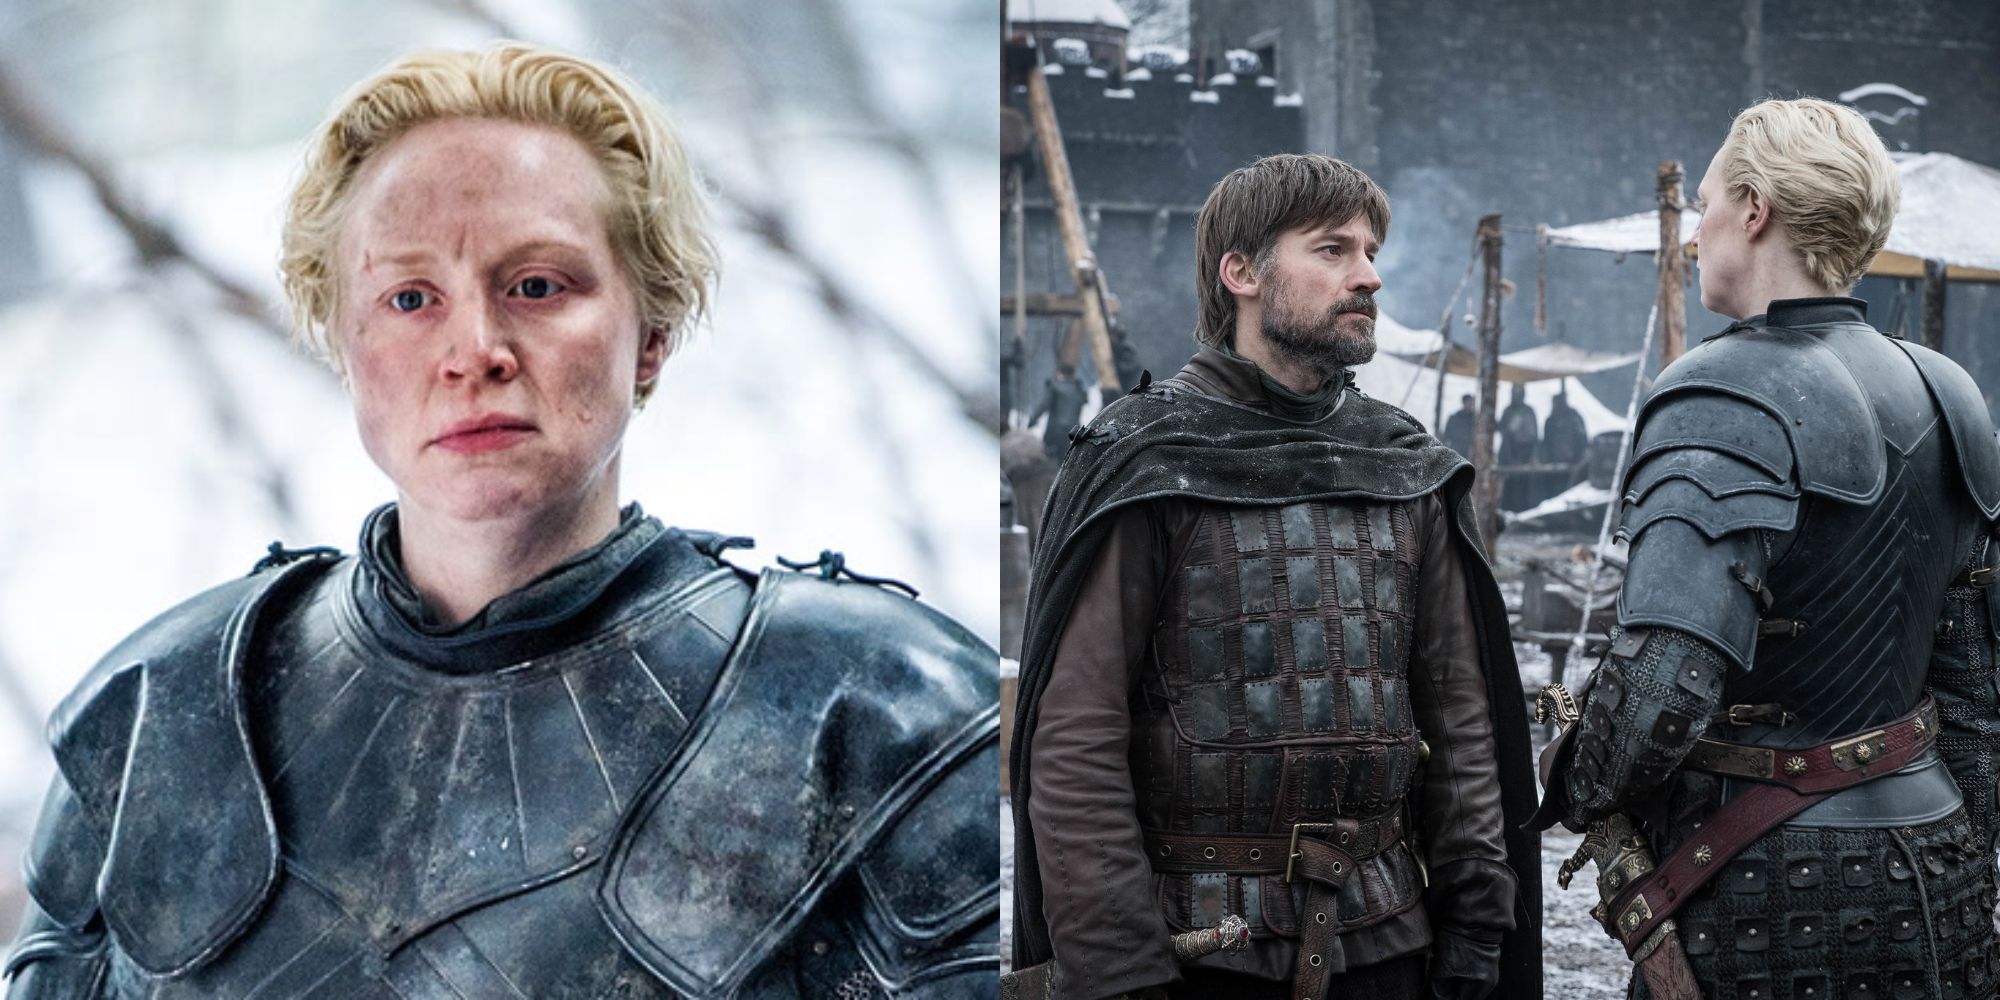 Game Of Thrones: 10 Differences Between Brienne In The Show And The Books